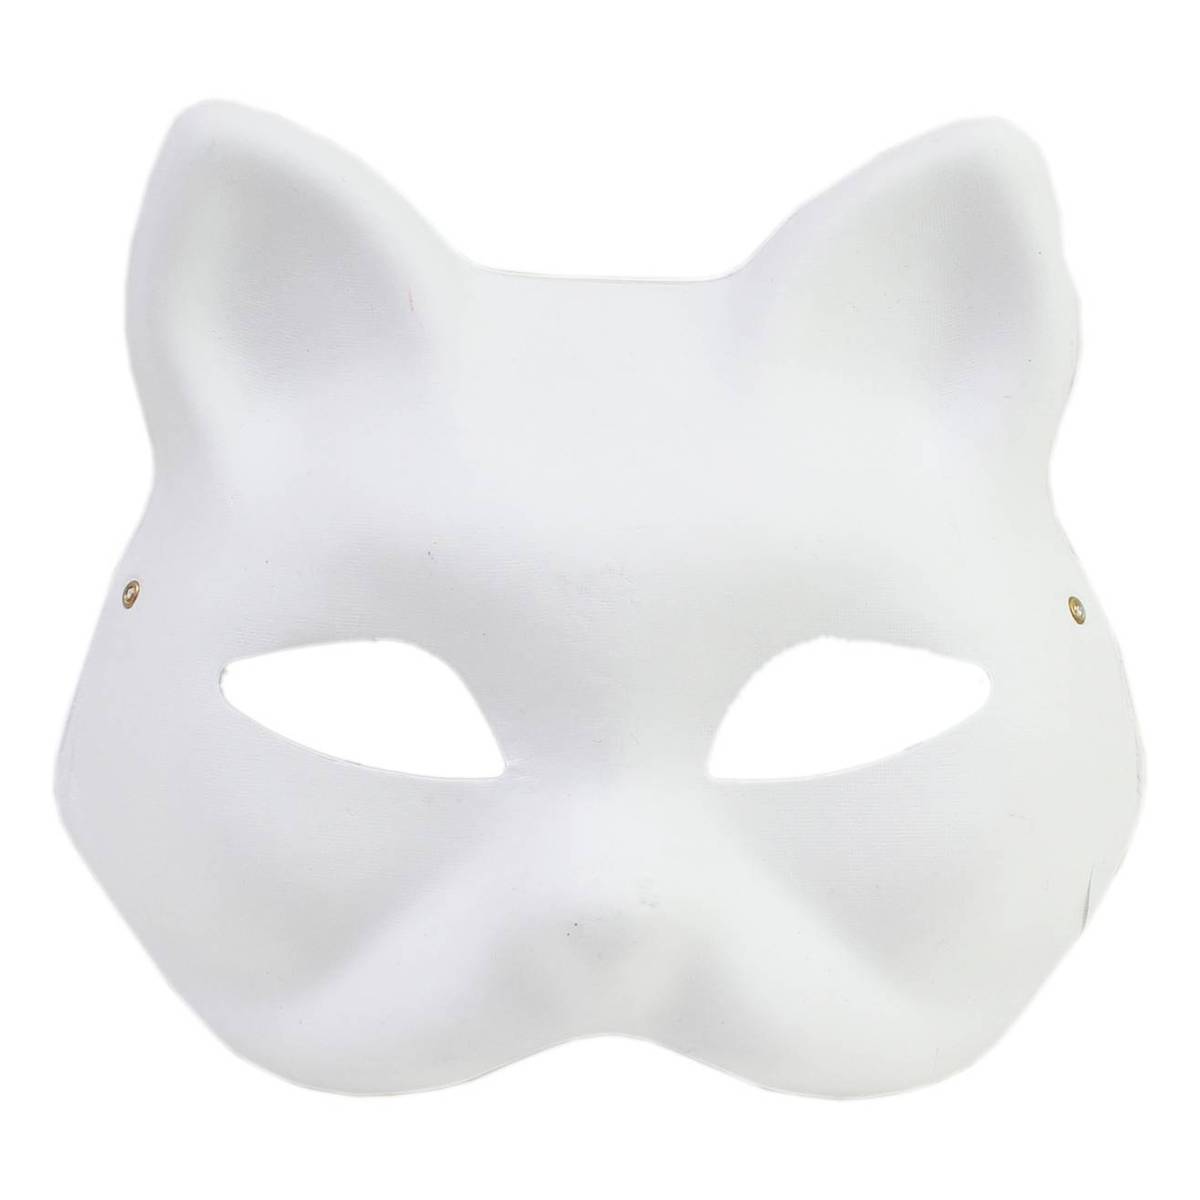 Therian Grey Cat Mask with fur details. Brand new and in perfect condition.